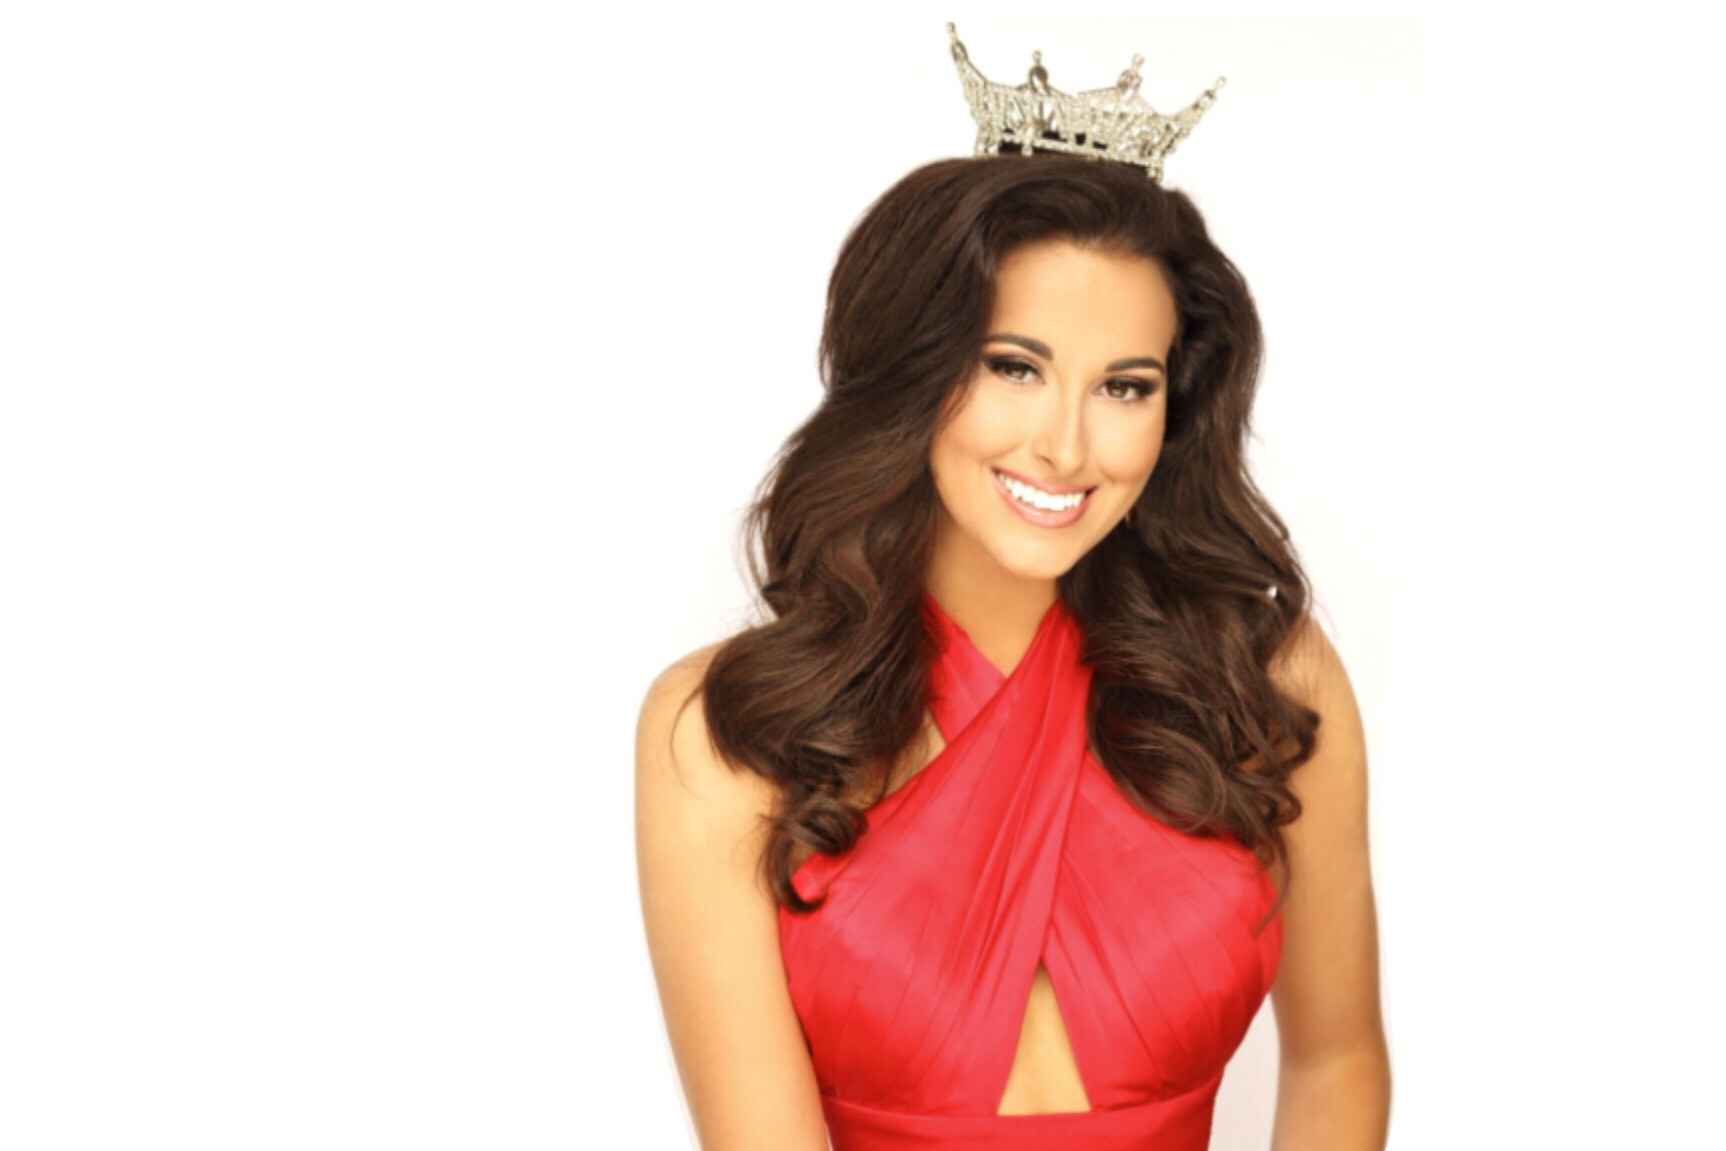 Ariel Beverly is this year's Miss Illinois.